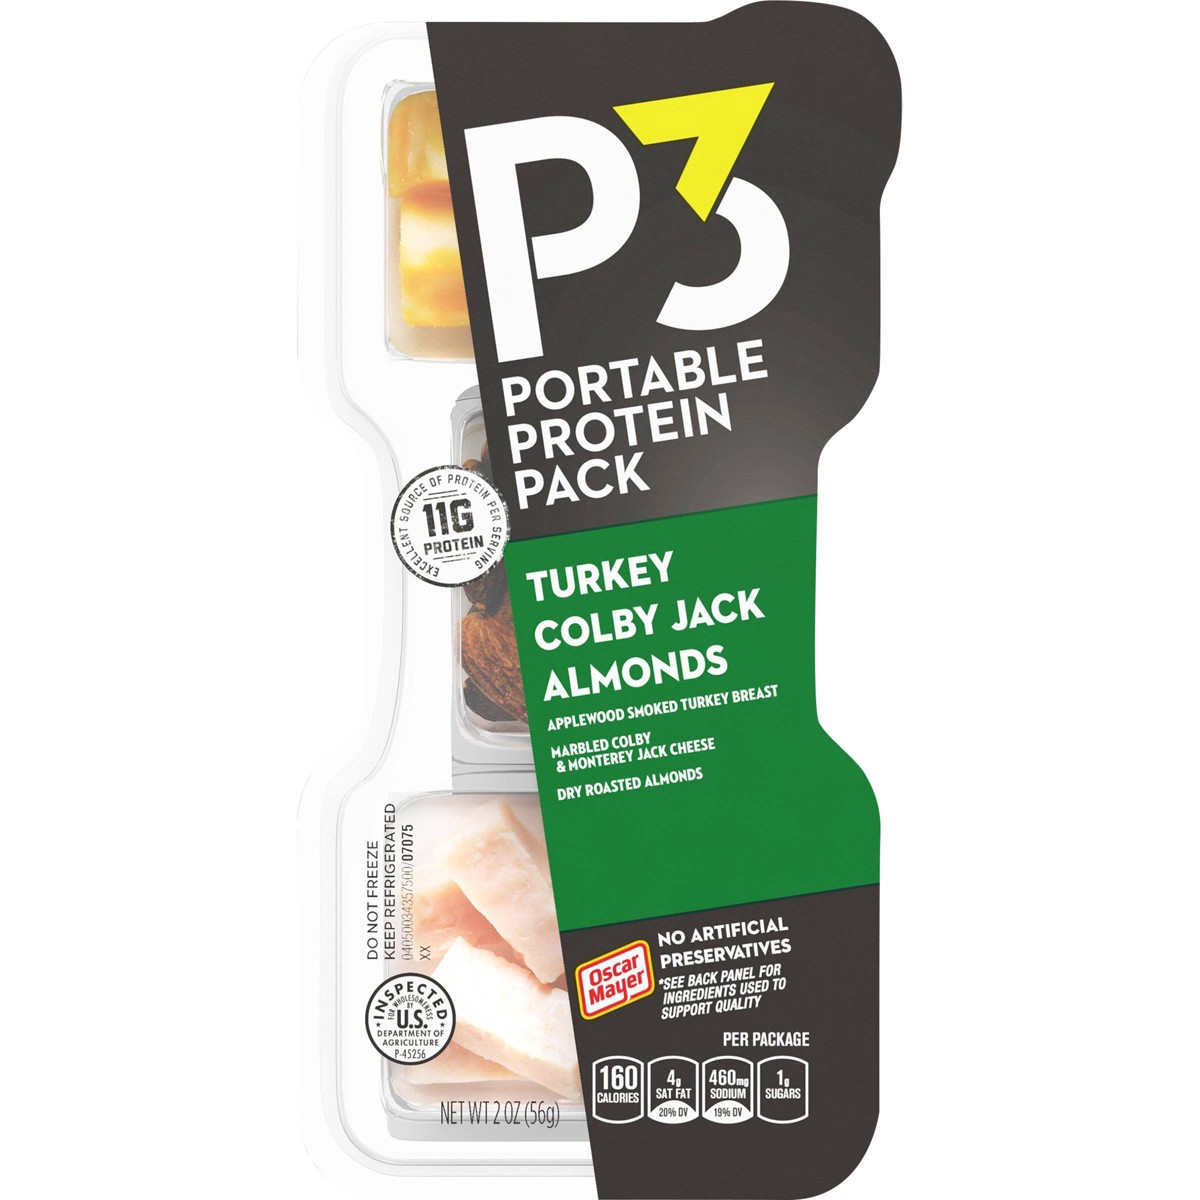 slide 2 of 14, P3 Portable Protein Snack Pack with Turkey, Almonds & Colby Jack Cheese Tray, 2 oz